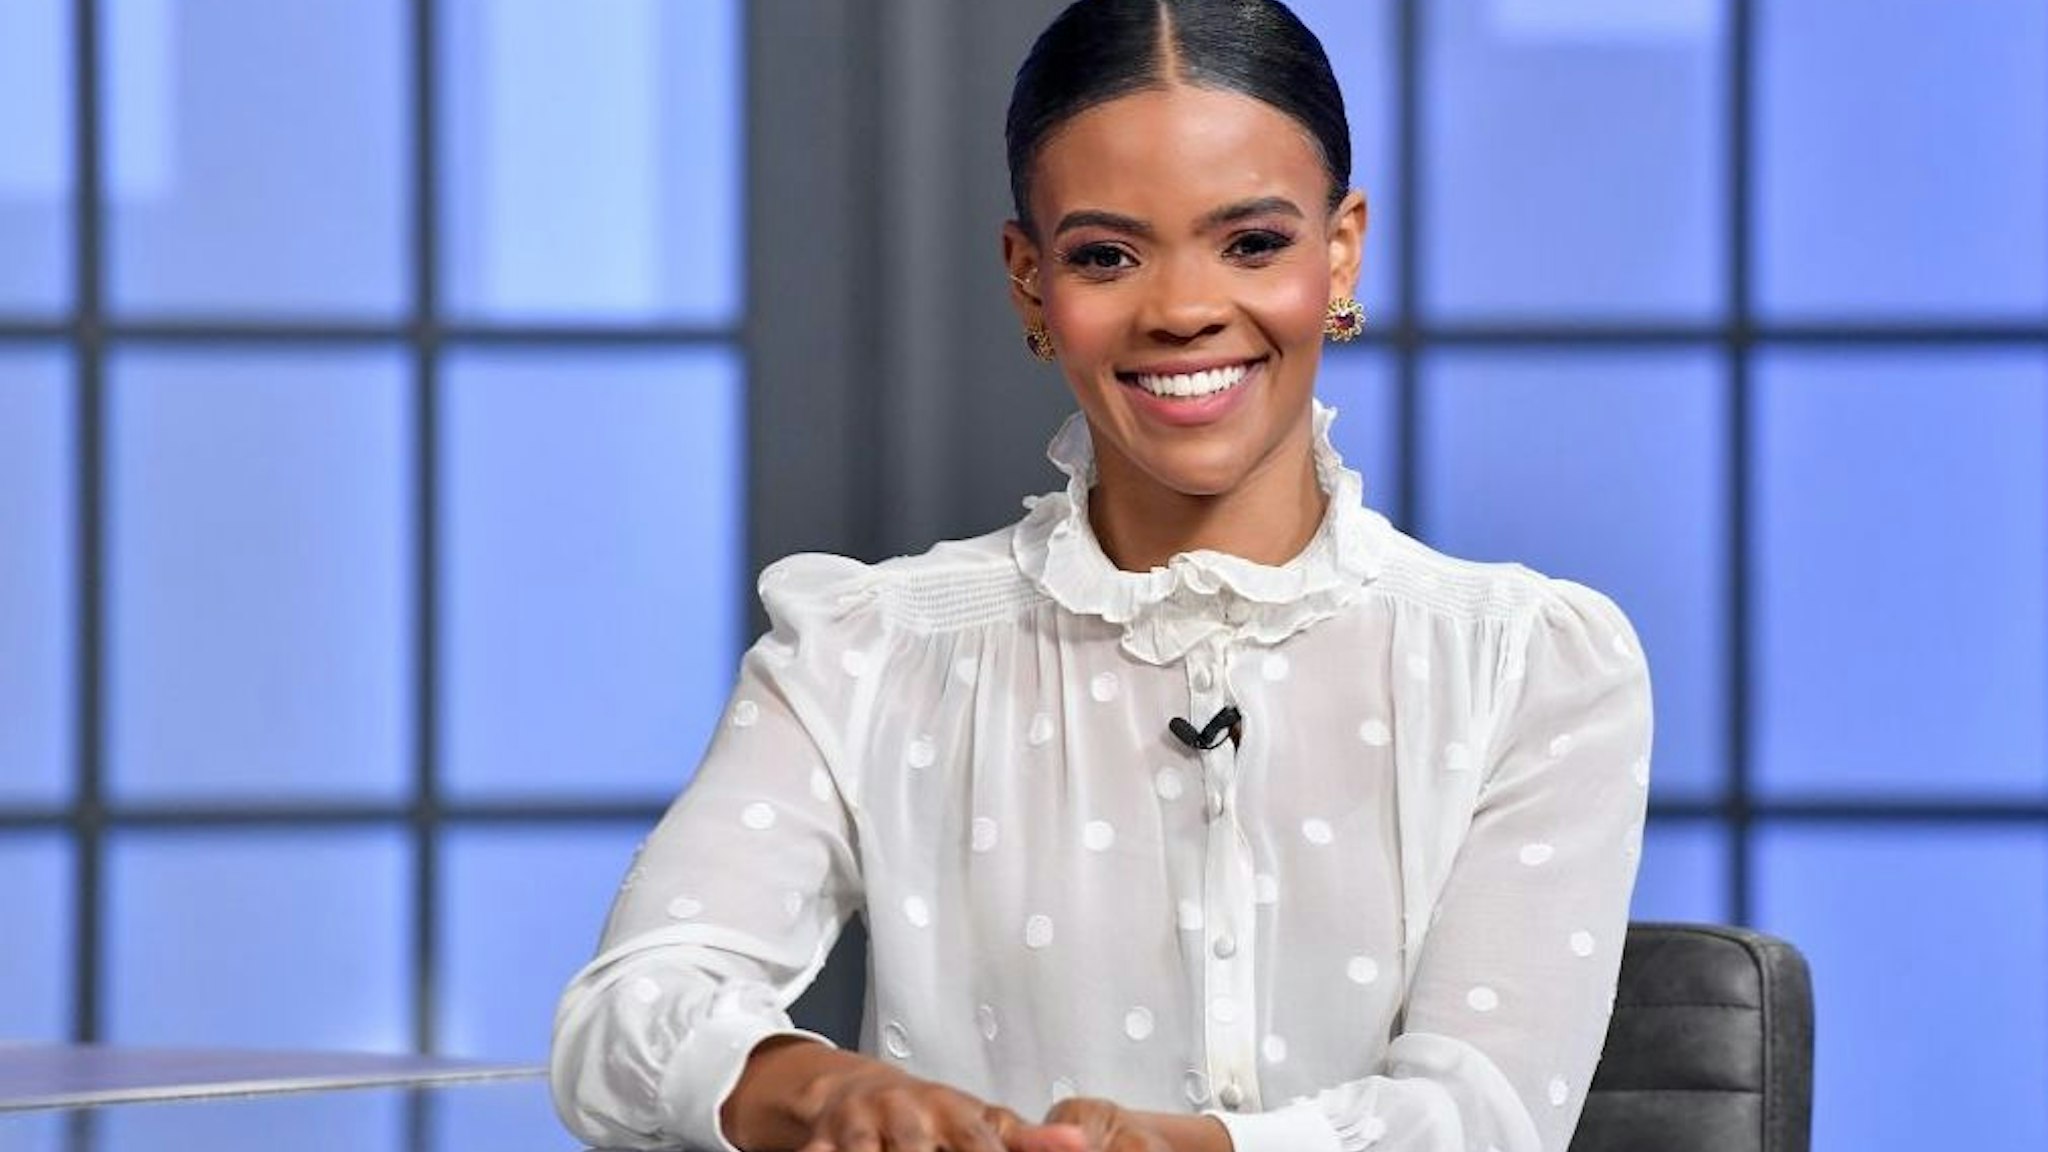 Candace Owens is seen on set of "Candace" on November 15, 2021 in Nashville, Tennessee.